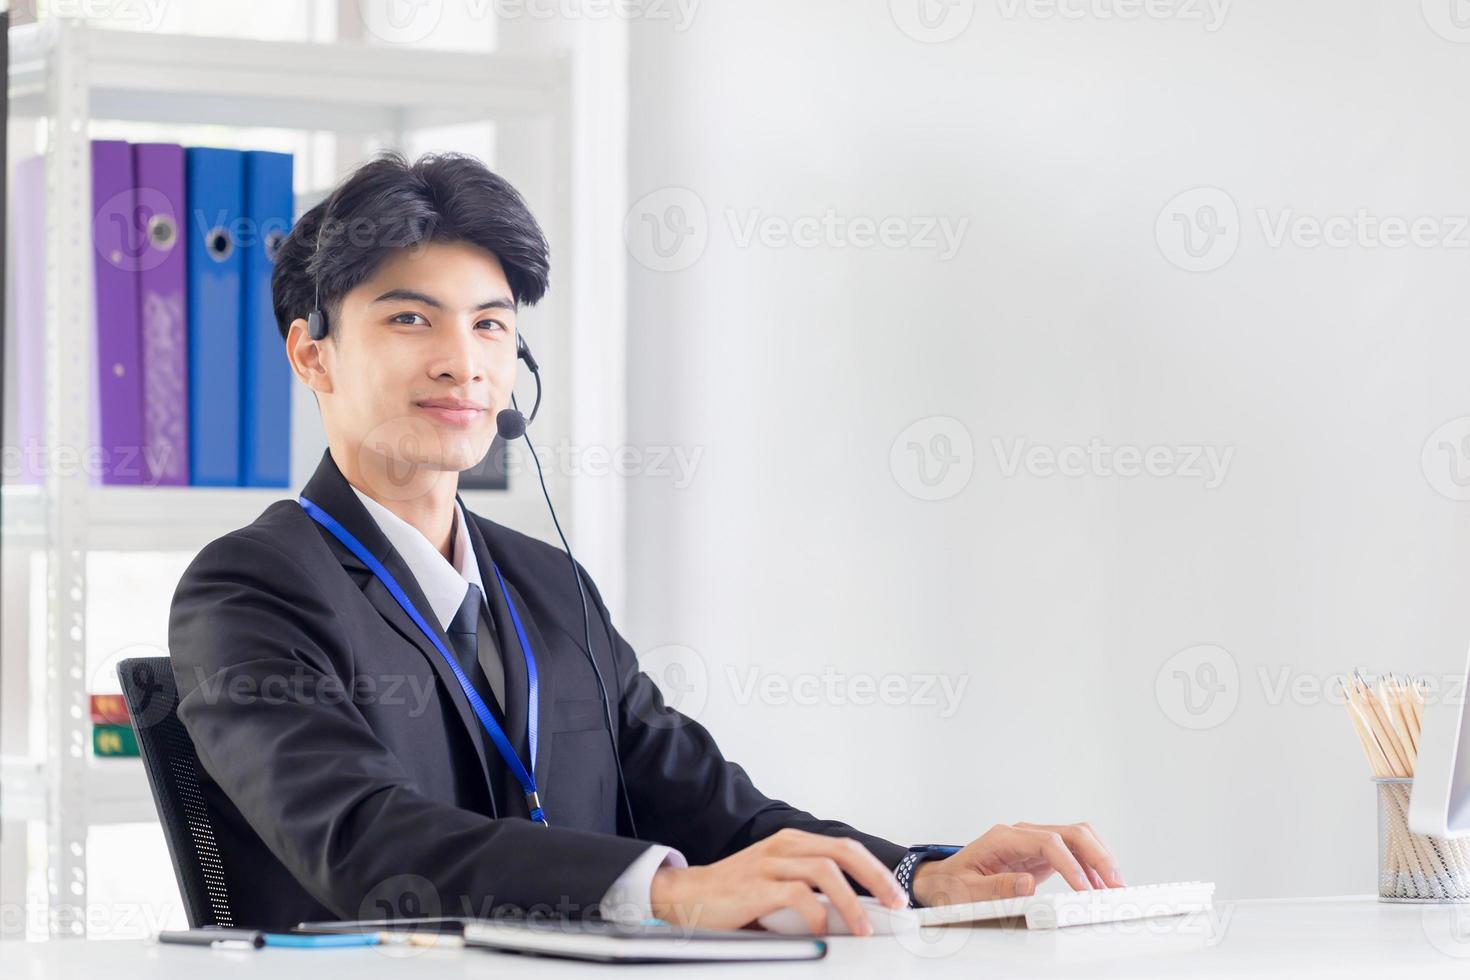 Happiness and smiling young operator man with headset, Professional operator service concepts photo